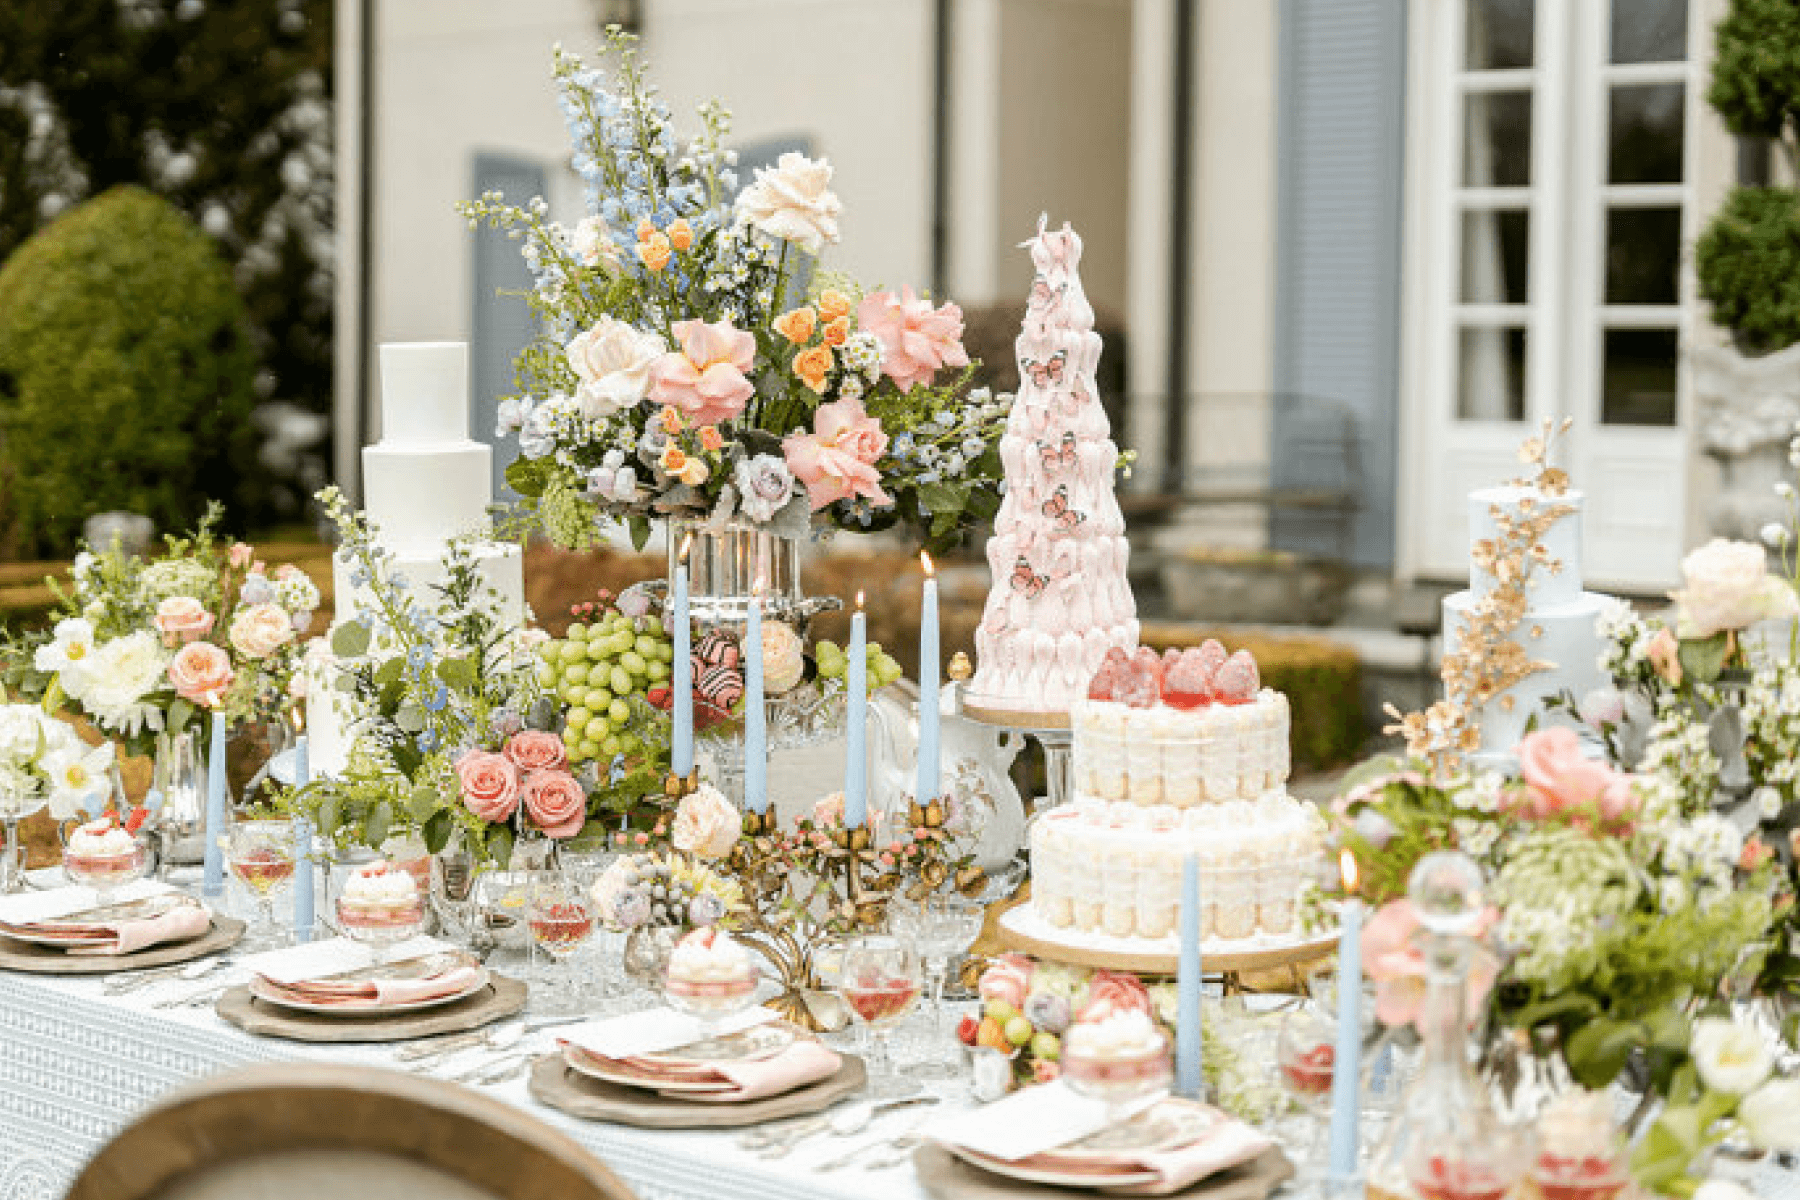 An outdoor banquet table is decorated for what appears to be a summer-y wedding or celebratory event with plenty of pastel floral arrangements (roses), grapes, tiered cakes with fruit and butterflies, and light blue taper candles.